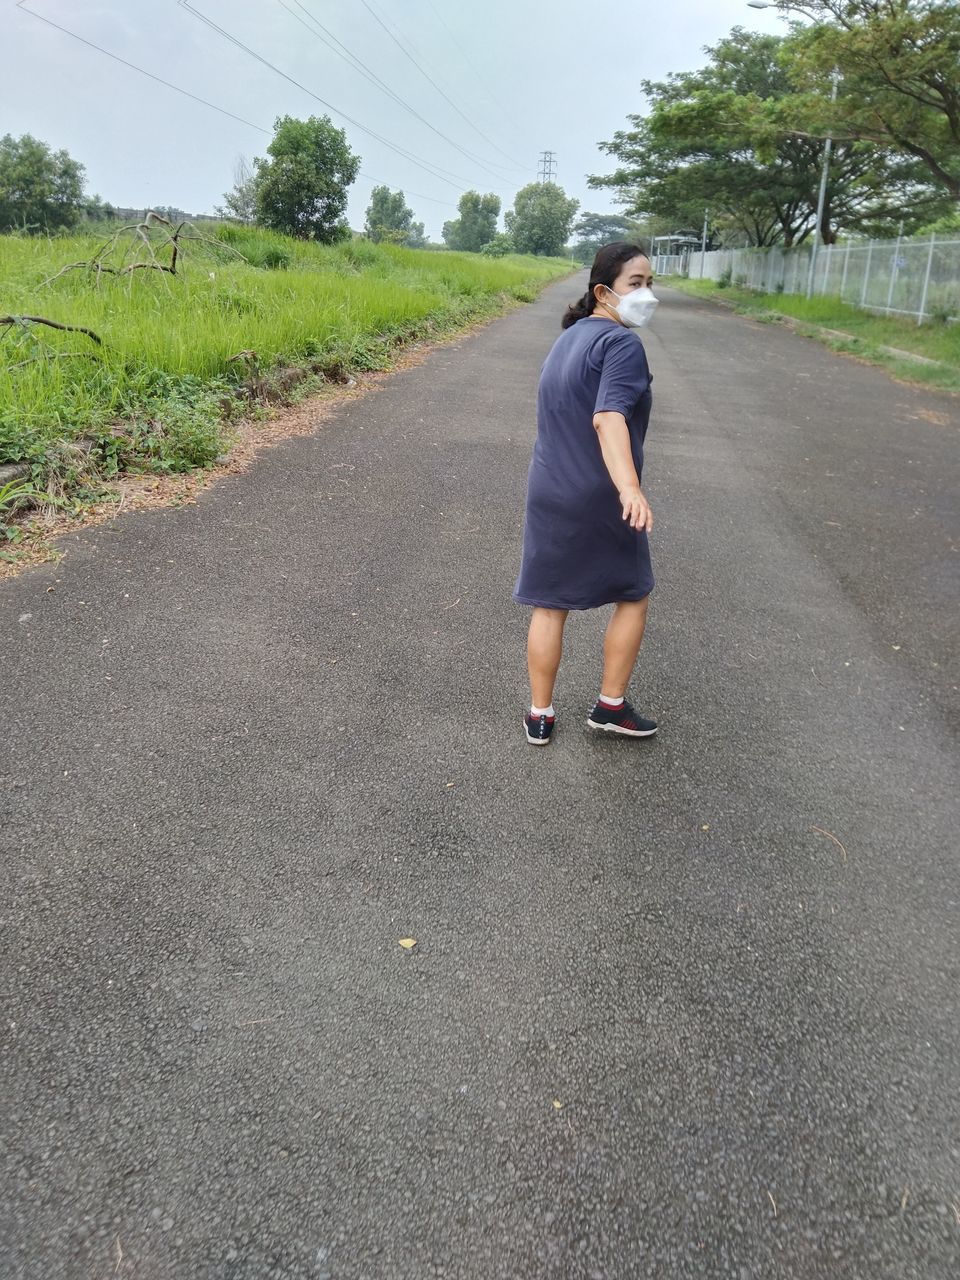 one person, full length, road, asphalt, transportation, day, casual clothing, plant, rear view, lifestyles, nature, adult, leisure activity, the way forward, tree, sky, men, road surface, sports, city, outdoors, walking, tarmac, standing, street, motion, young adult